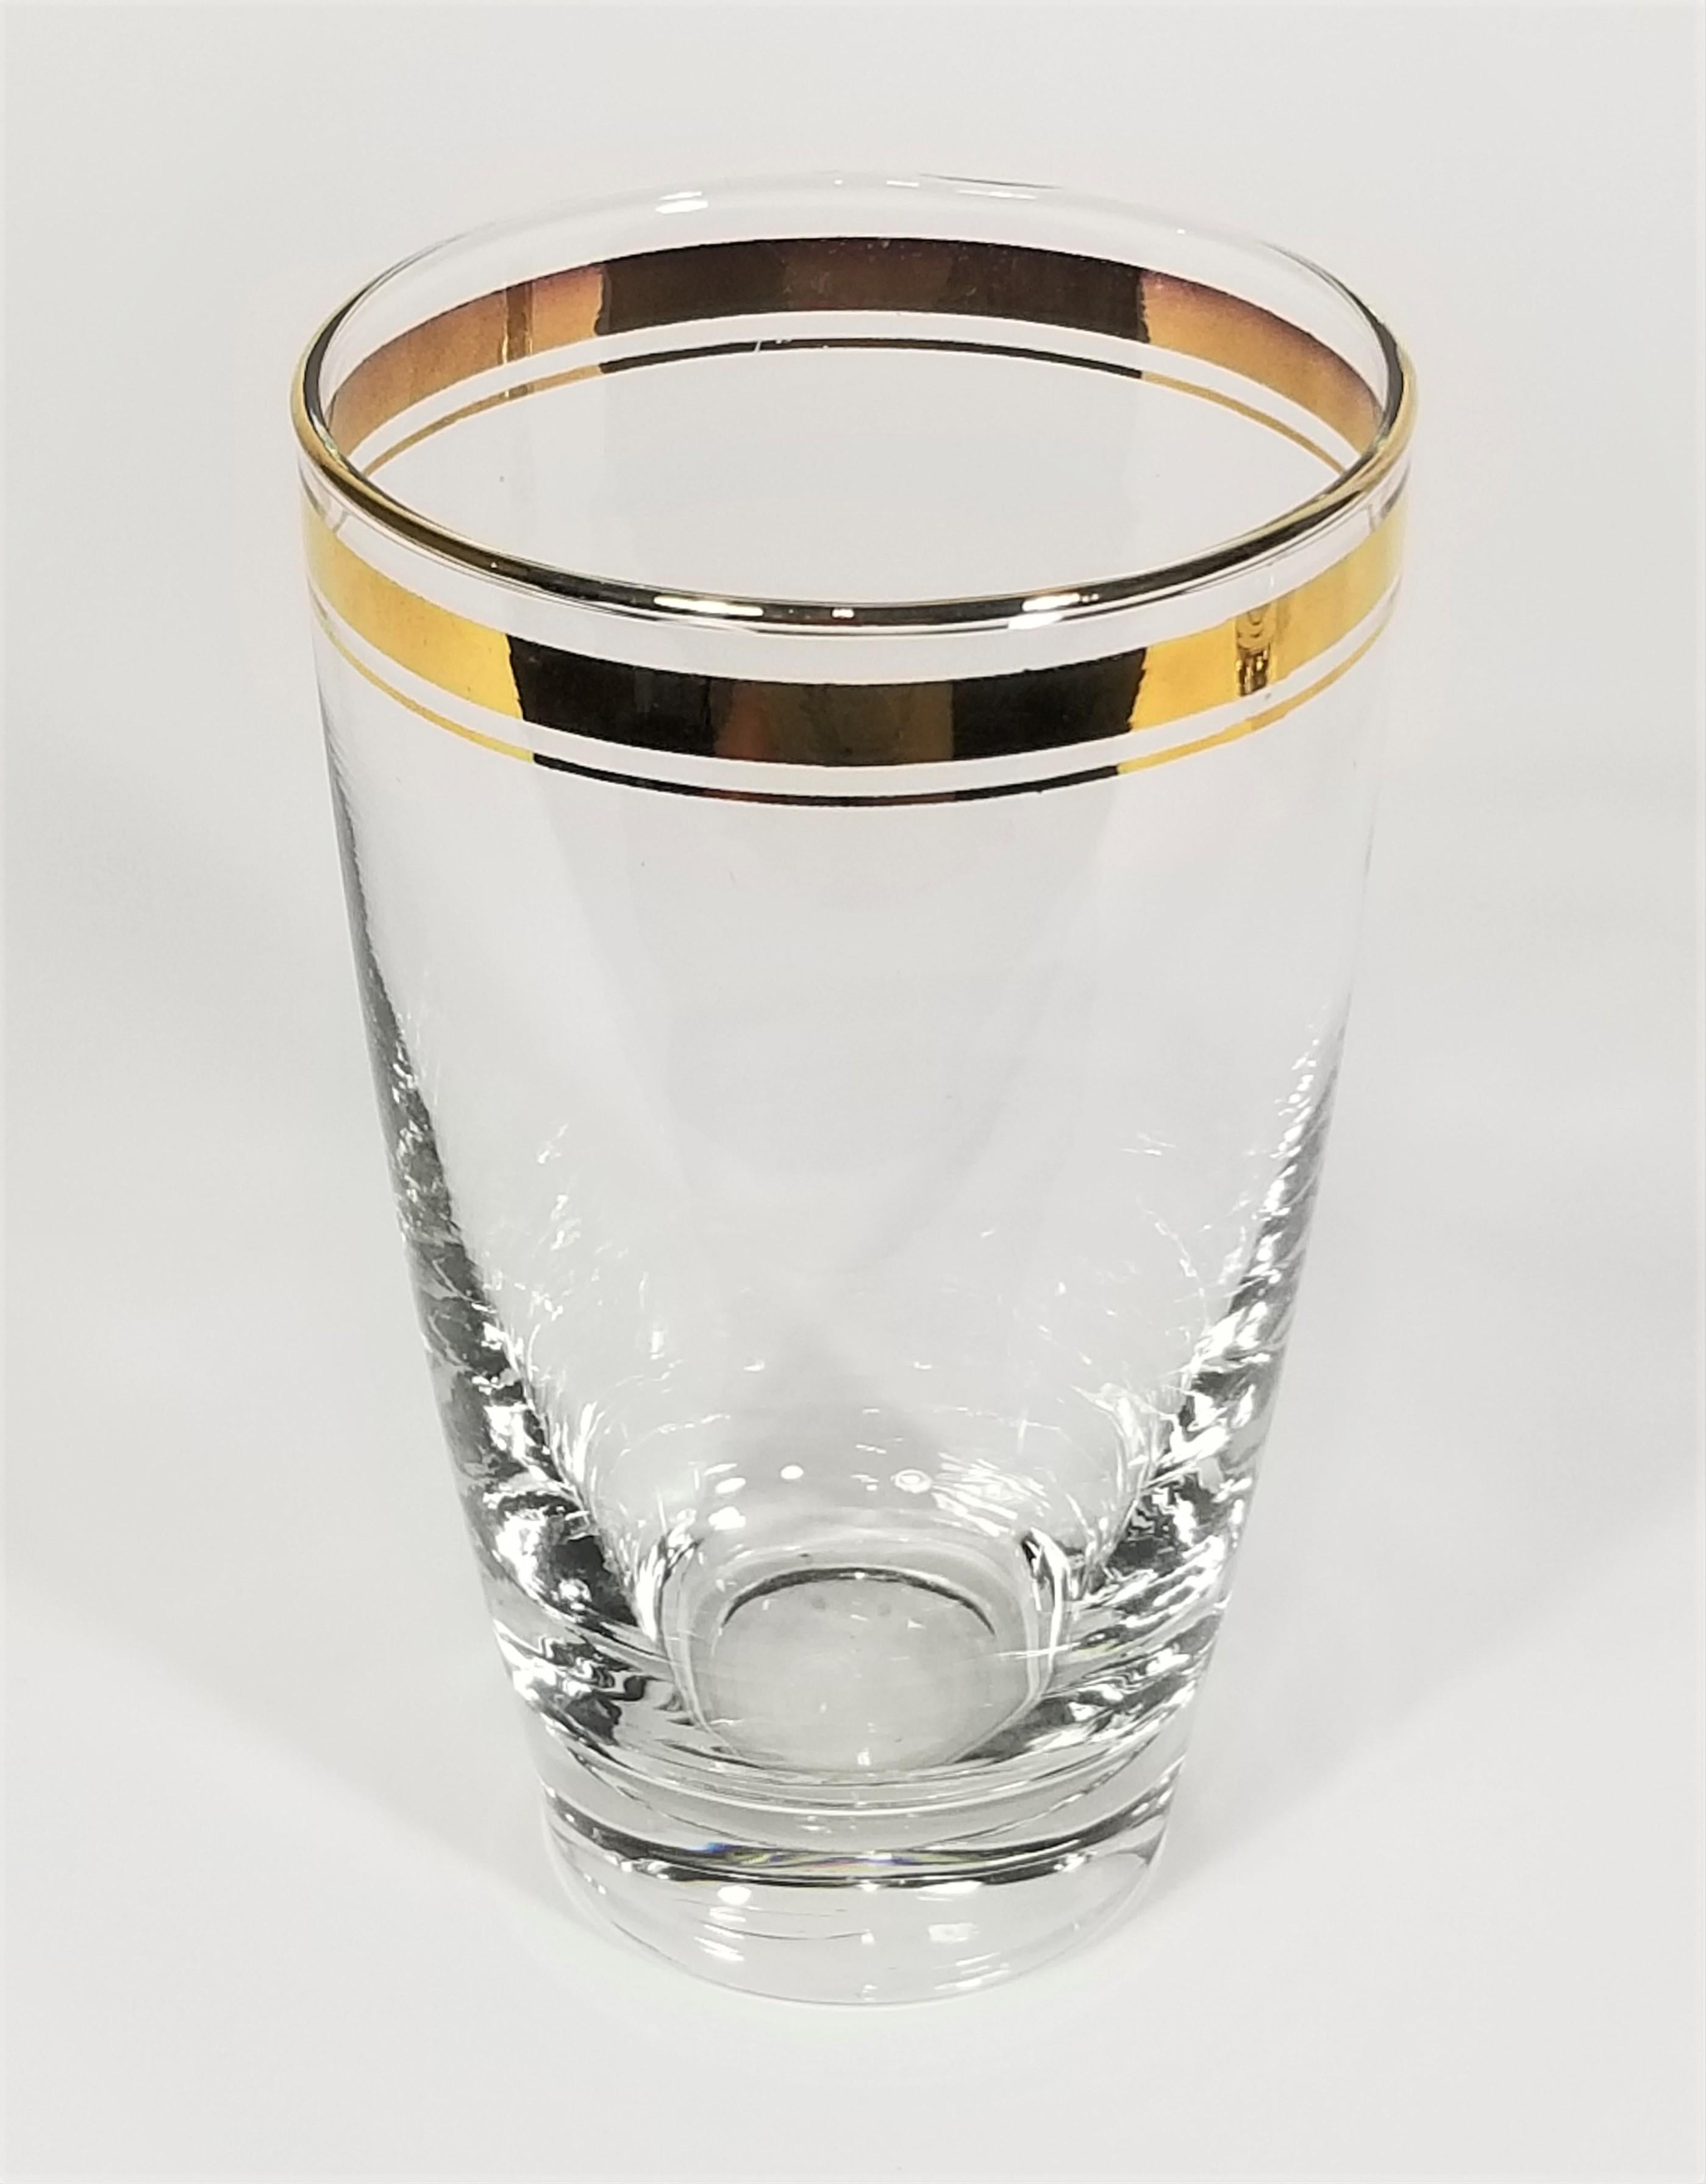 Libbey Mid-century Gold Rimmed Glassware Barware Set of 6 In Excellent Condition For Sale In New York, NY